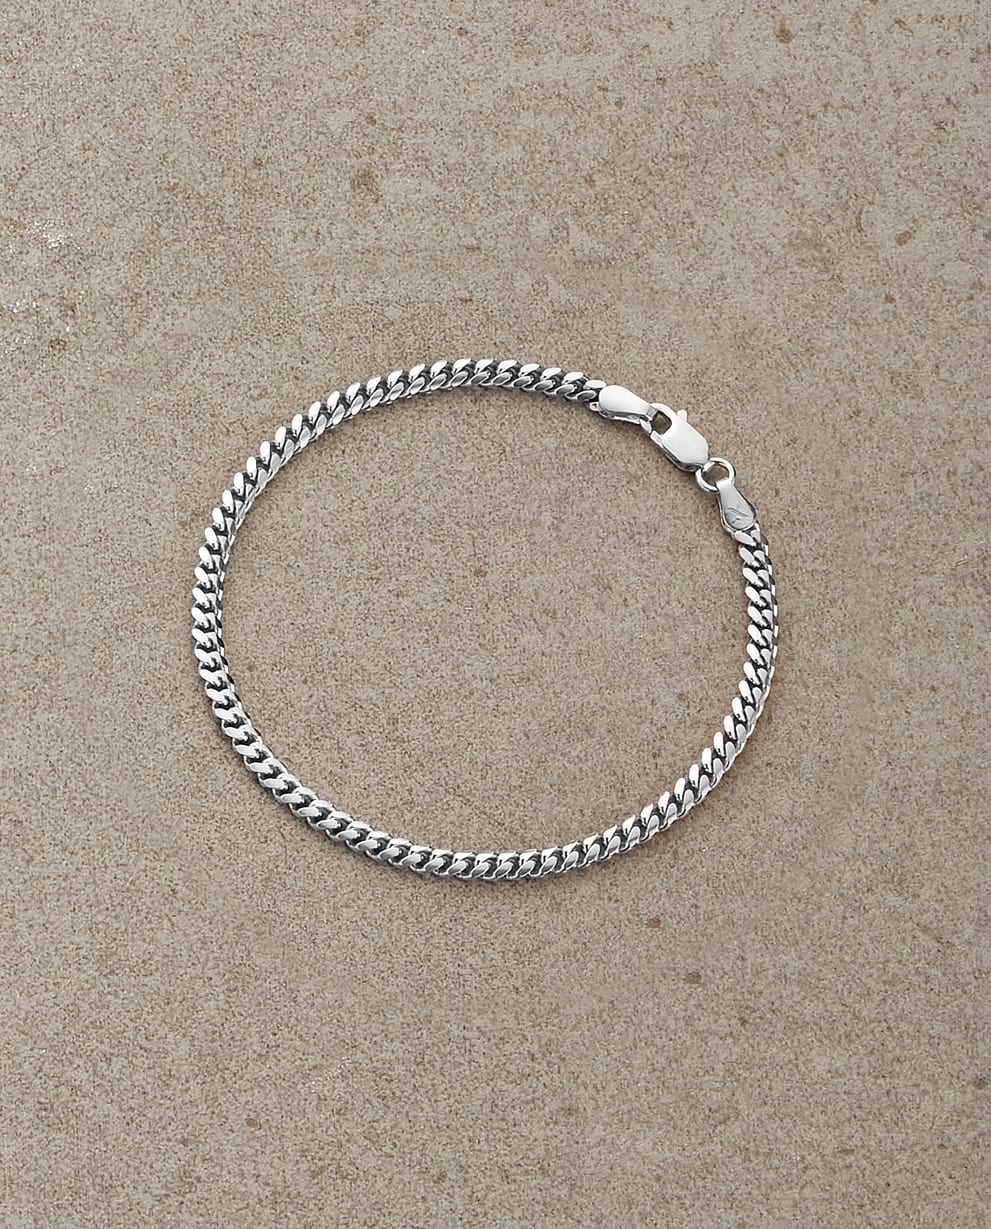 Image Cuban Link Bracelet - 3mm Silver - Made With Precious Materials